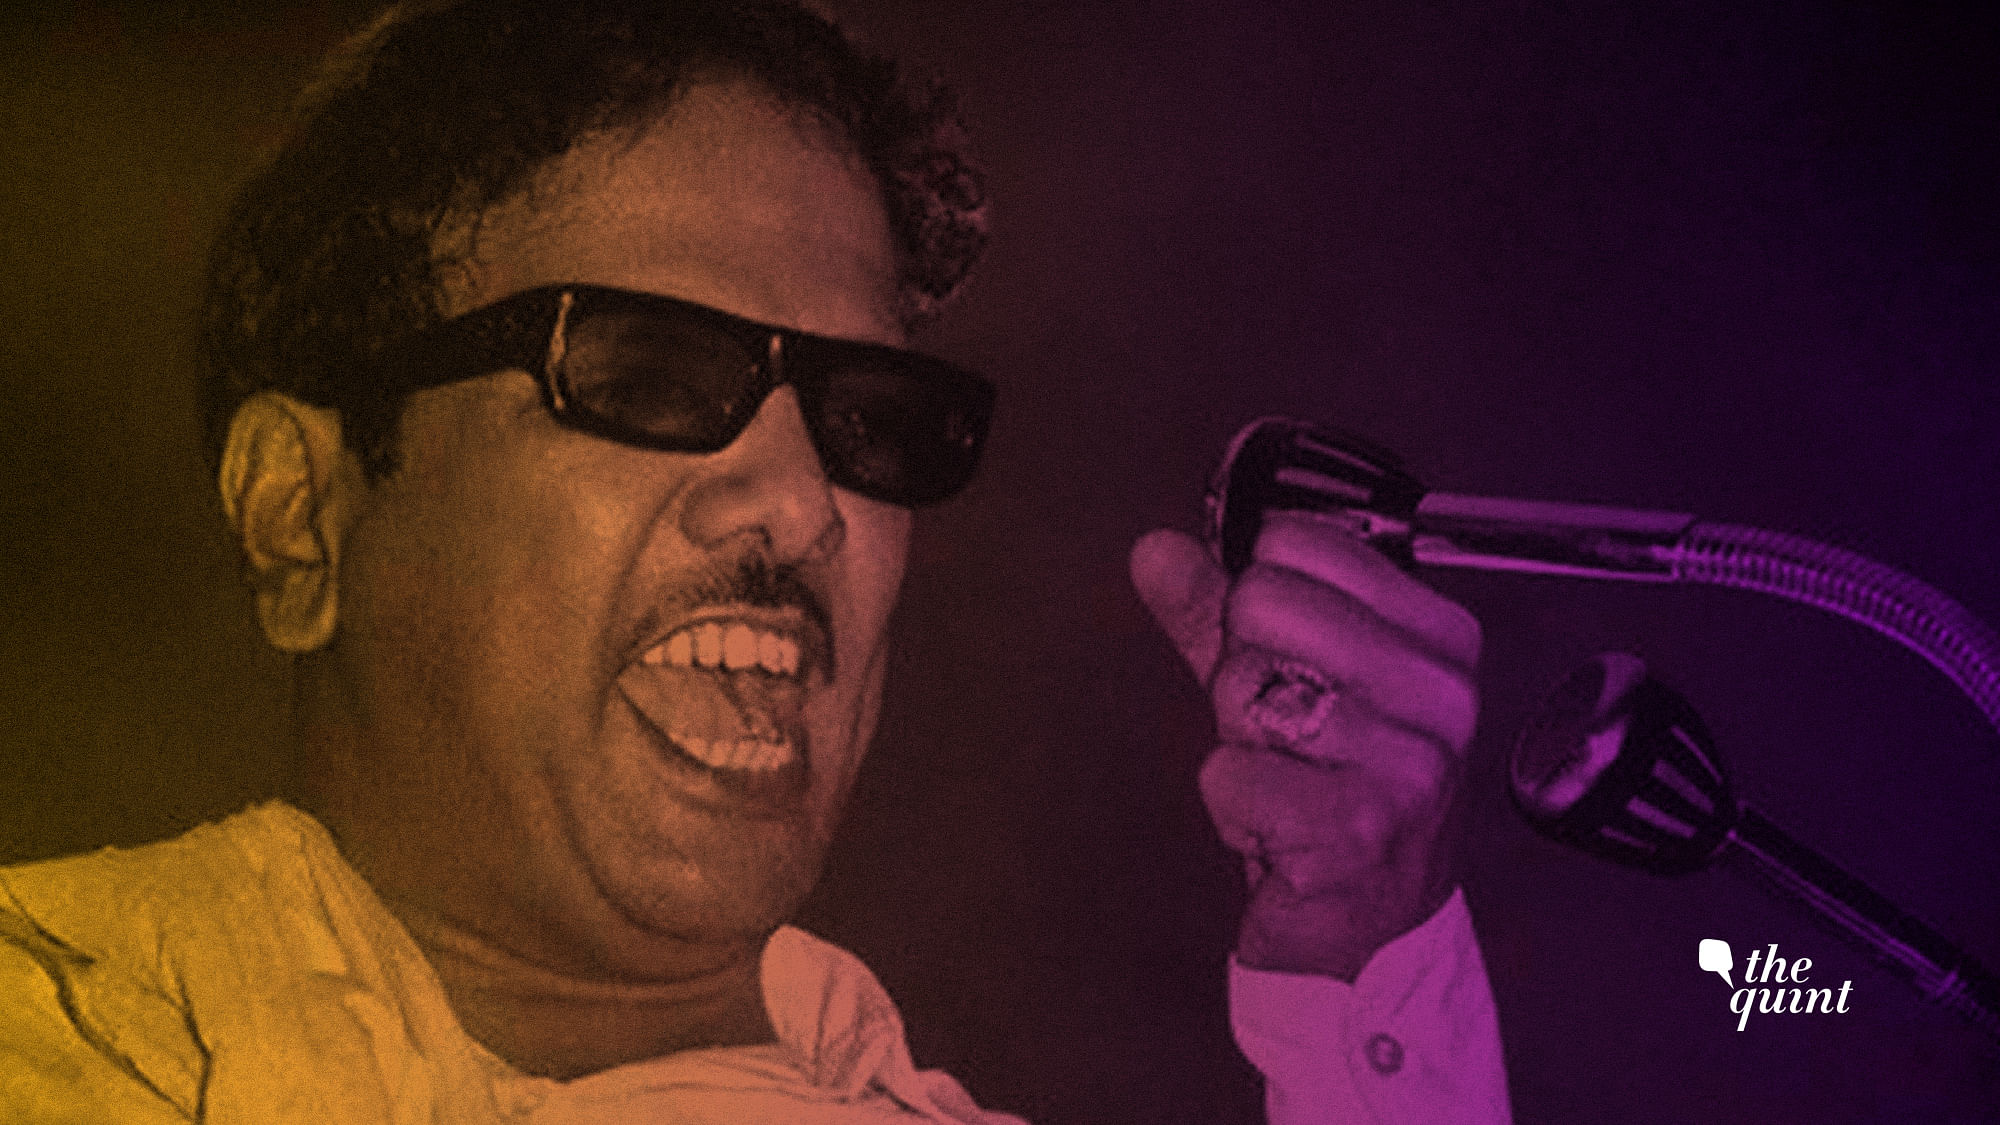 A young Karunanidhi known for his poetry and screenwriting for Tamil cinema, among other things.